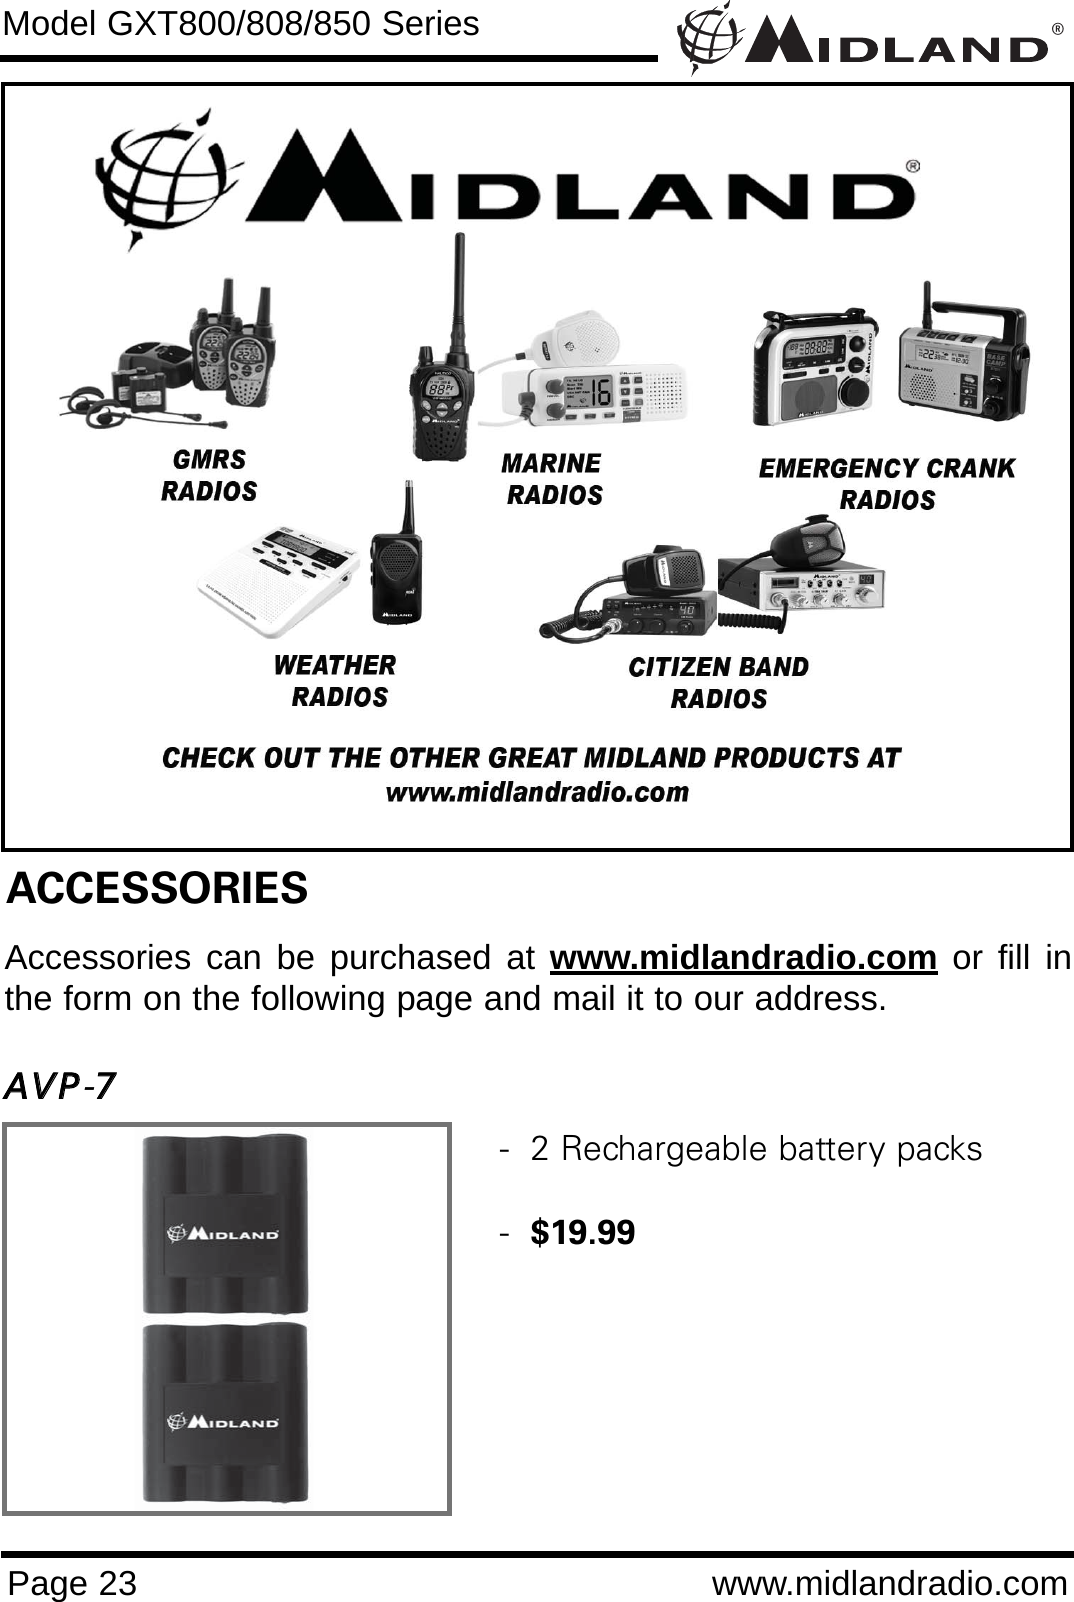 ®Page 23 www.midlandradio.comModel GXT800/808/850 SeriesACCESSORIESAccessories can be purchased at www.midlandradio.com or fill inthe form on the following page and mail it to our address.AAVVPP-77-  2 Rechargeable battery packs-  $19.99